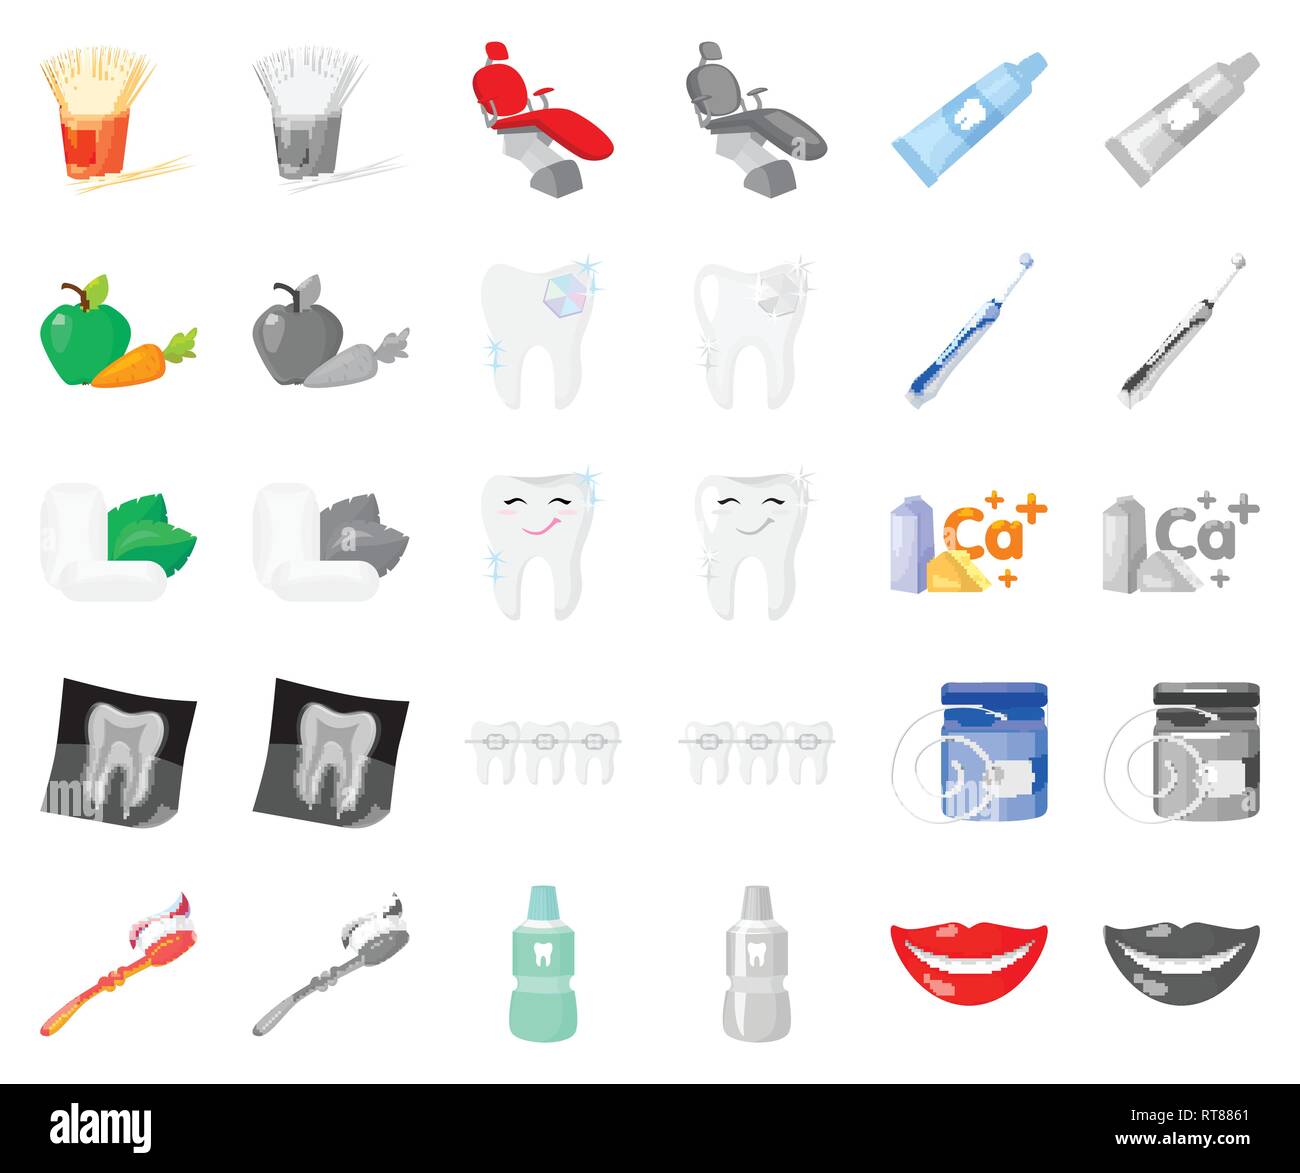 adaptation,apple,art,bottle,braces,calcium,care,carrot,cartoon,monochrom,chair,chewing,clinic,collection,dental,dentist,dentistry,design,diamond,doctor,electric,equipment,floss,gum,hygiene,icon,illustration,instrument,isolated,logo,medicine,mouthwash,ray,set,sign,smile,smiling,sources,symbol,teeth,tooth,toothbrush,toothpaste,toothpick,treatment,vector,web,white,x Vector Vectors , Stock Vector